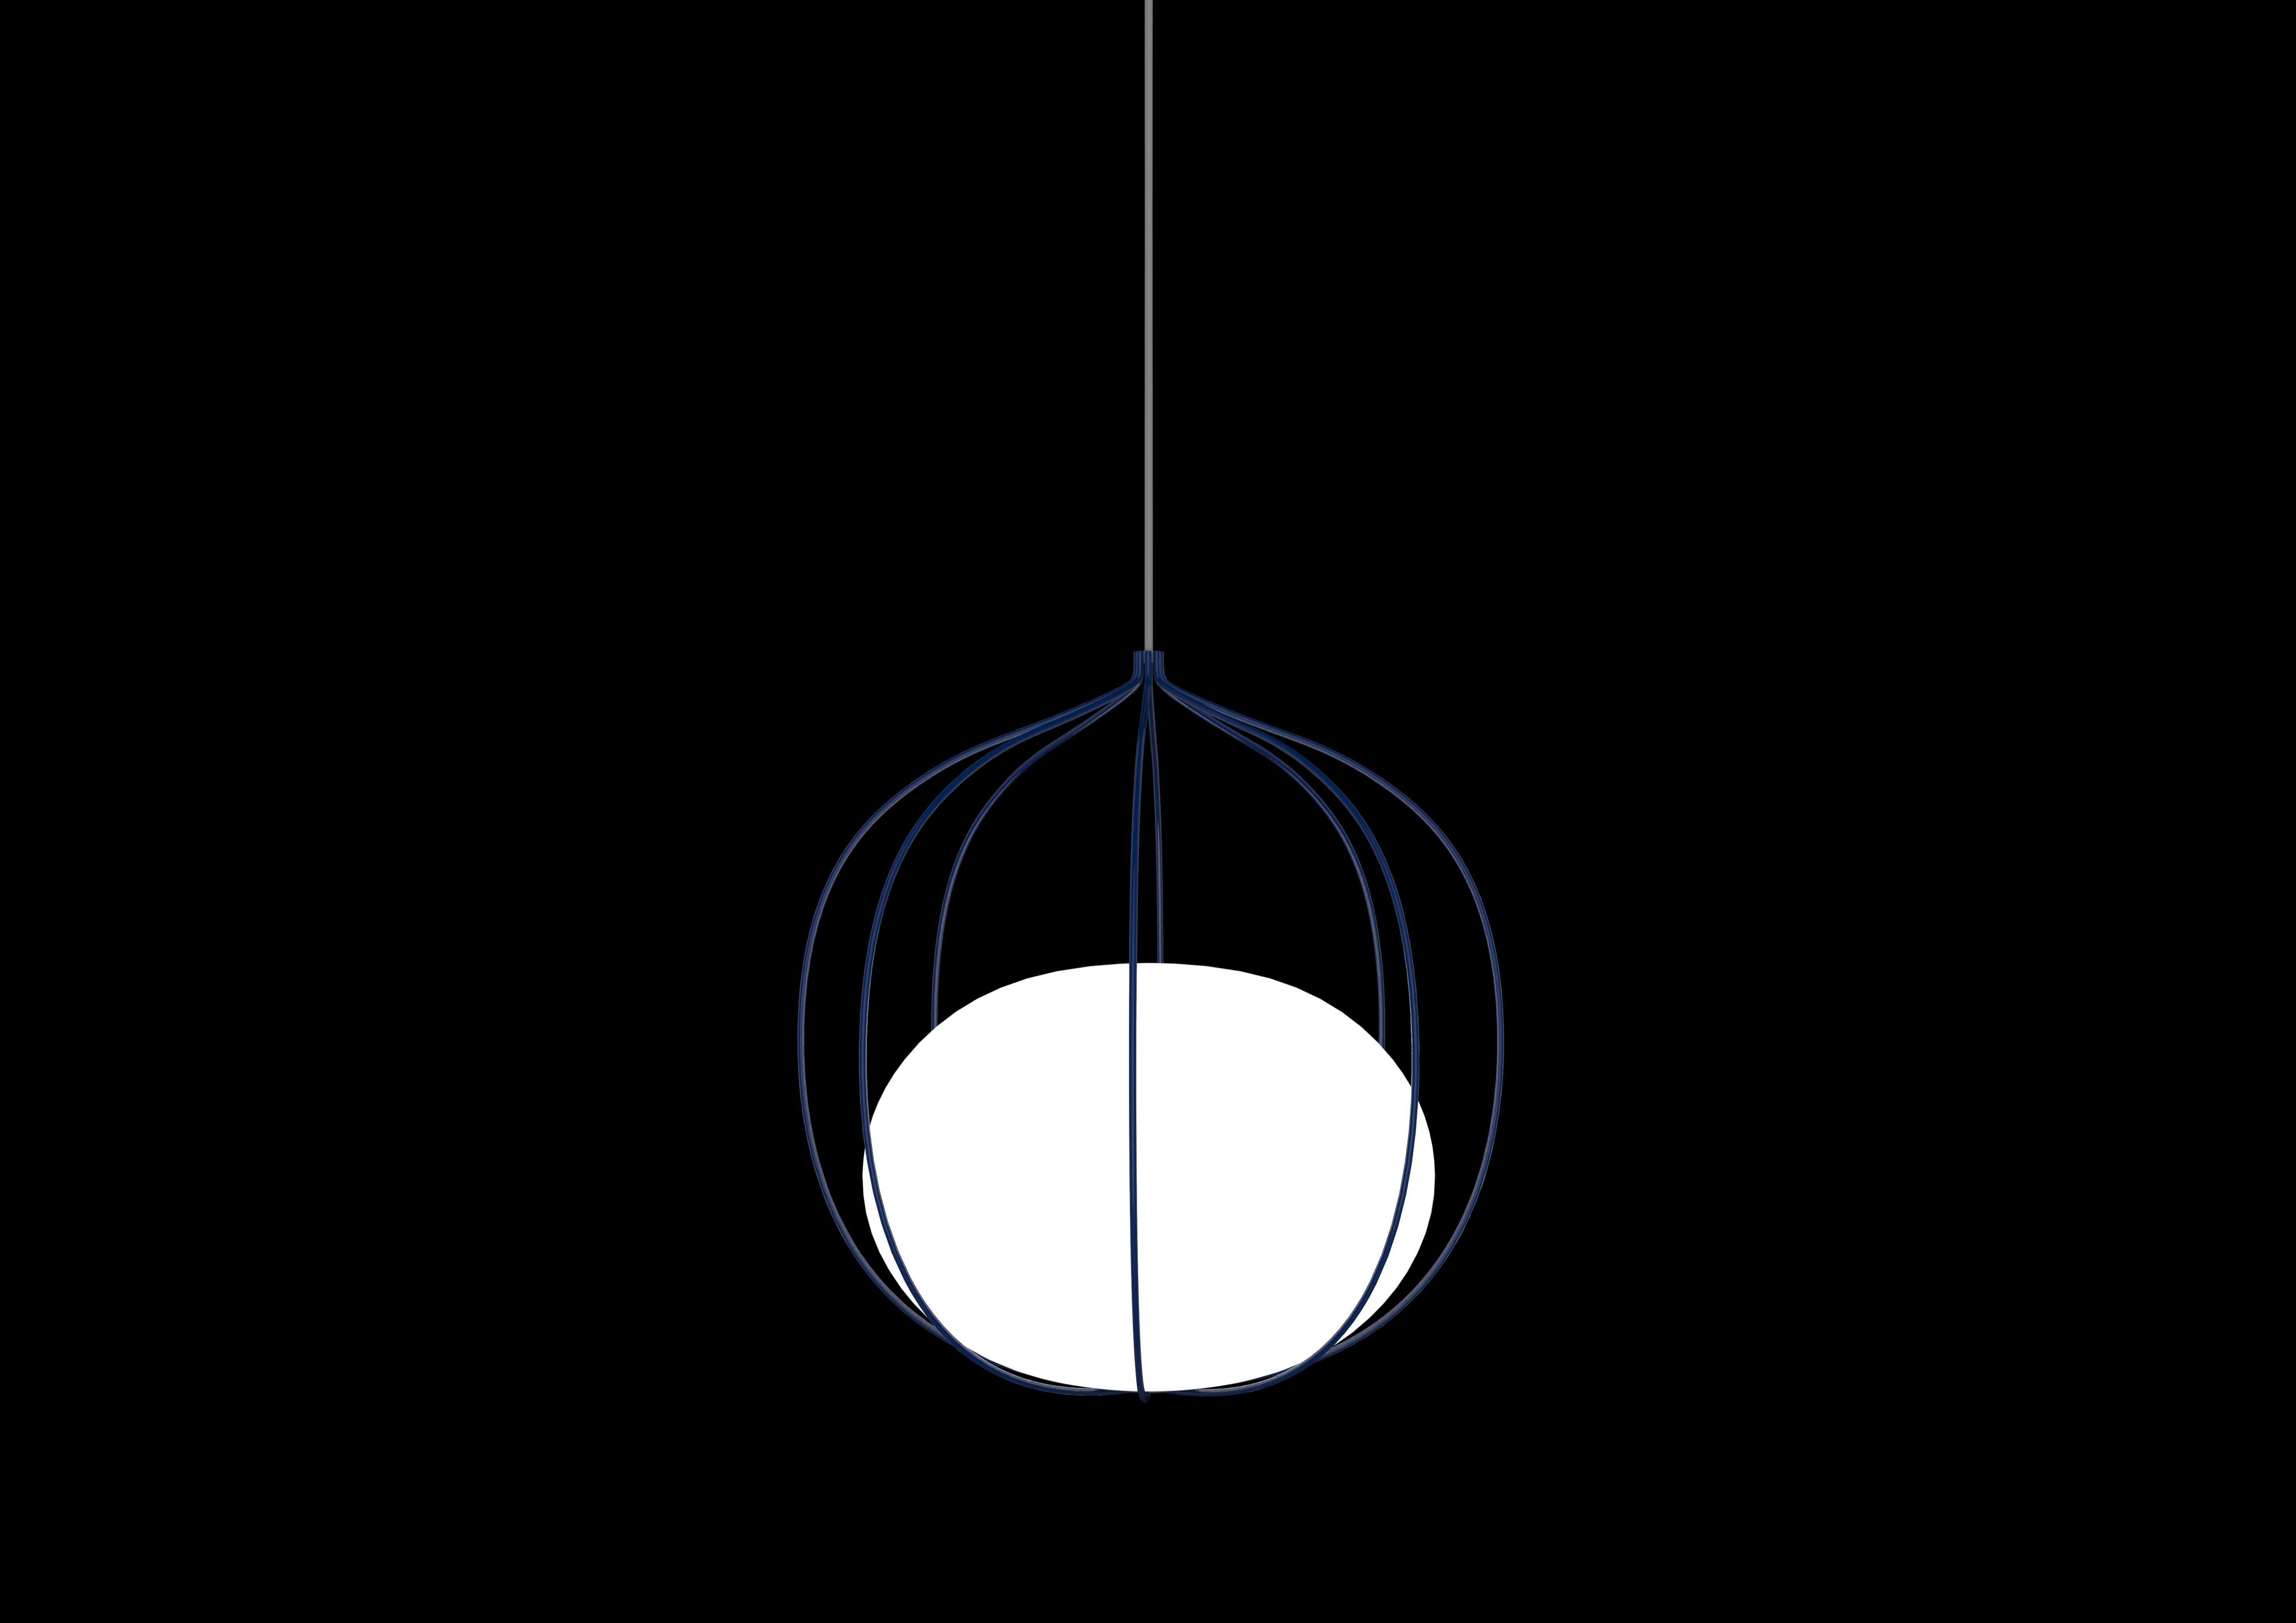 The Hoop pendant incorporates a metal cage-like frame made up of eight wires. Inside the frame, a globe-shaped glass diffuser rests at the bottom. The minimalist design and organic shape of this fixture is achieved by having the electrical wire fed